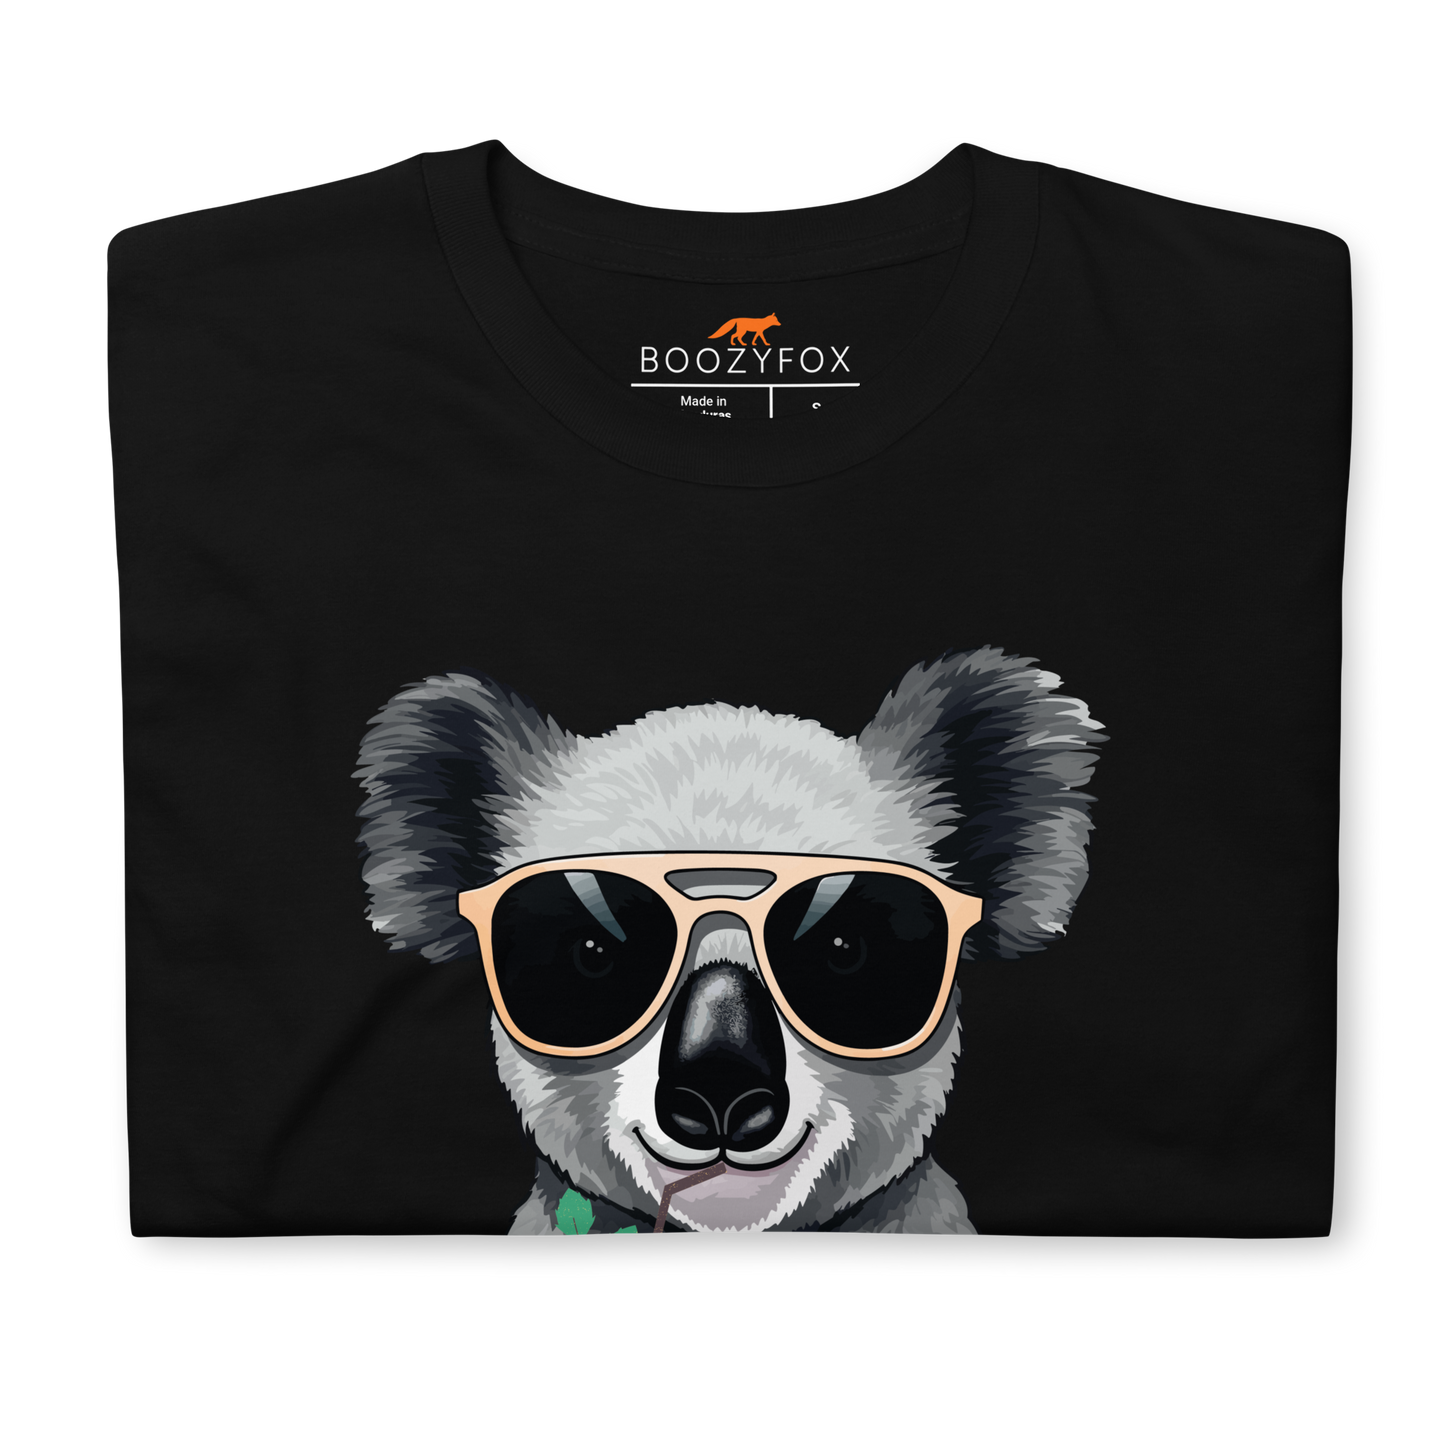 Front details of a Black Koala T-Shirt featuring an adorable Koalafied To Party graphic on the chest - Funny Graphic Koala T-Shirts - Boozy Fox